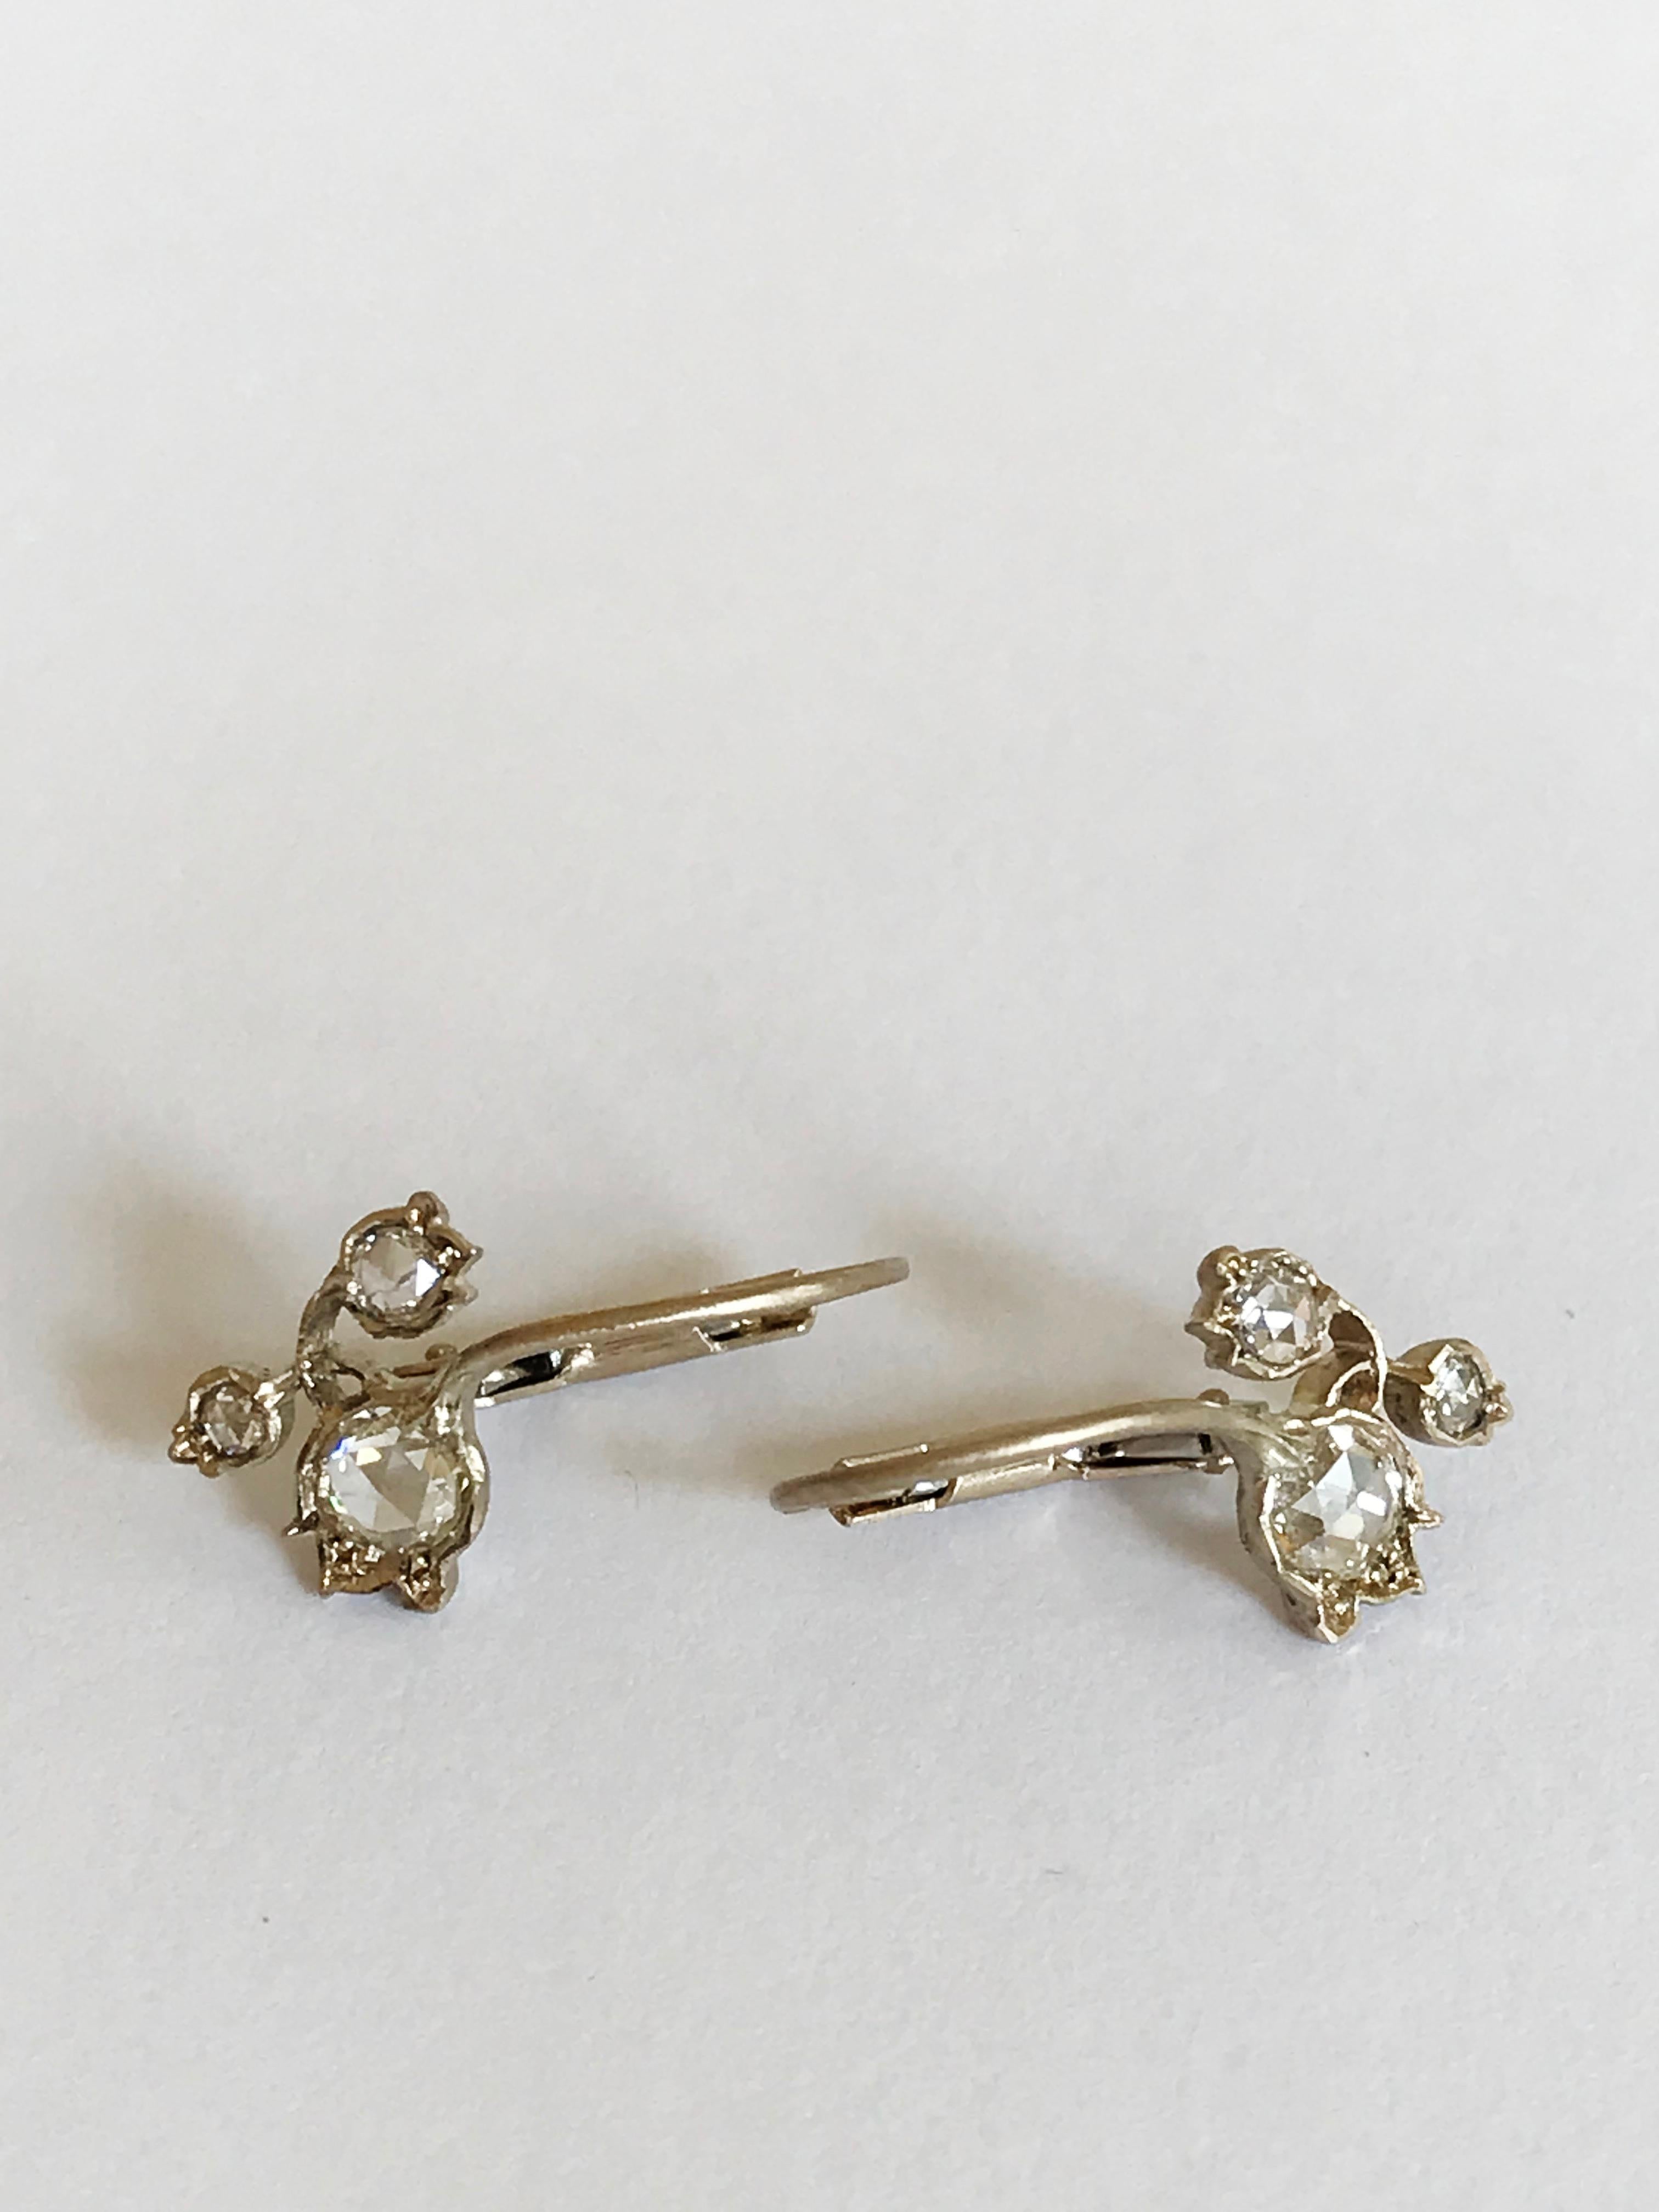 Dalben Rose Cut Diamonds White Gold Small Floral Earrings For Sale 3